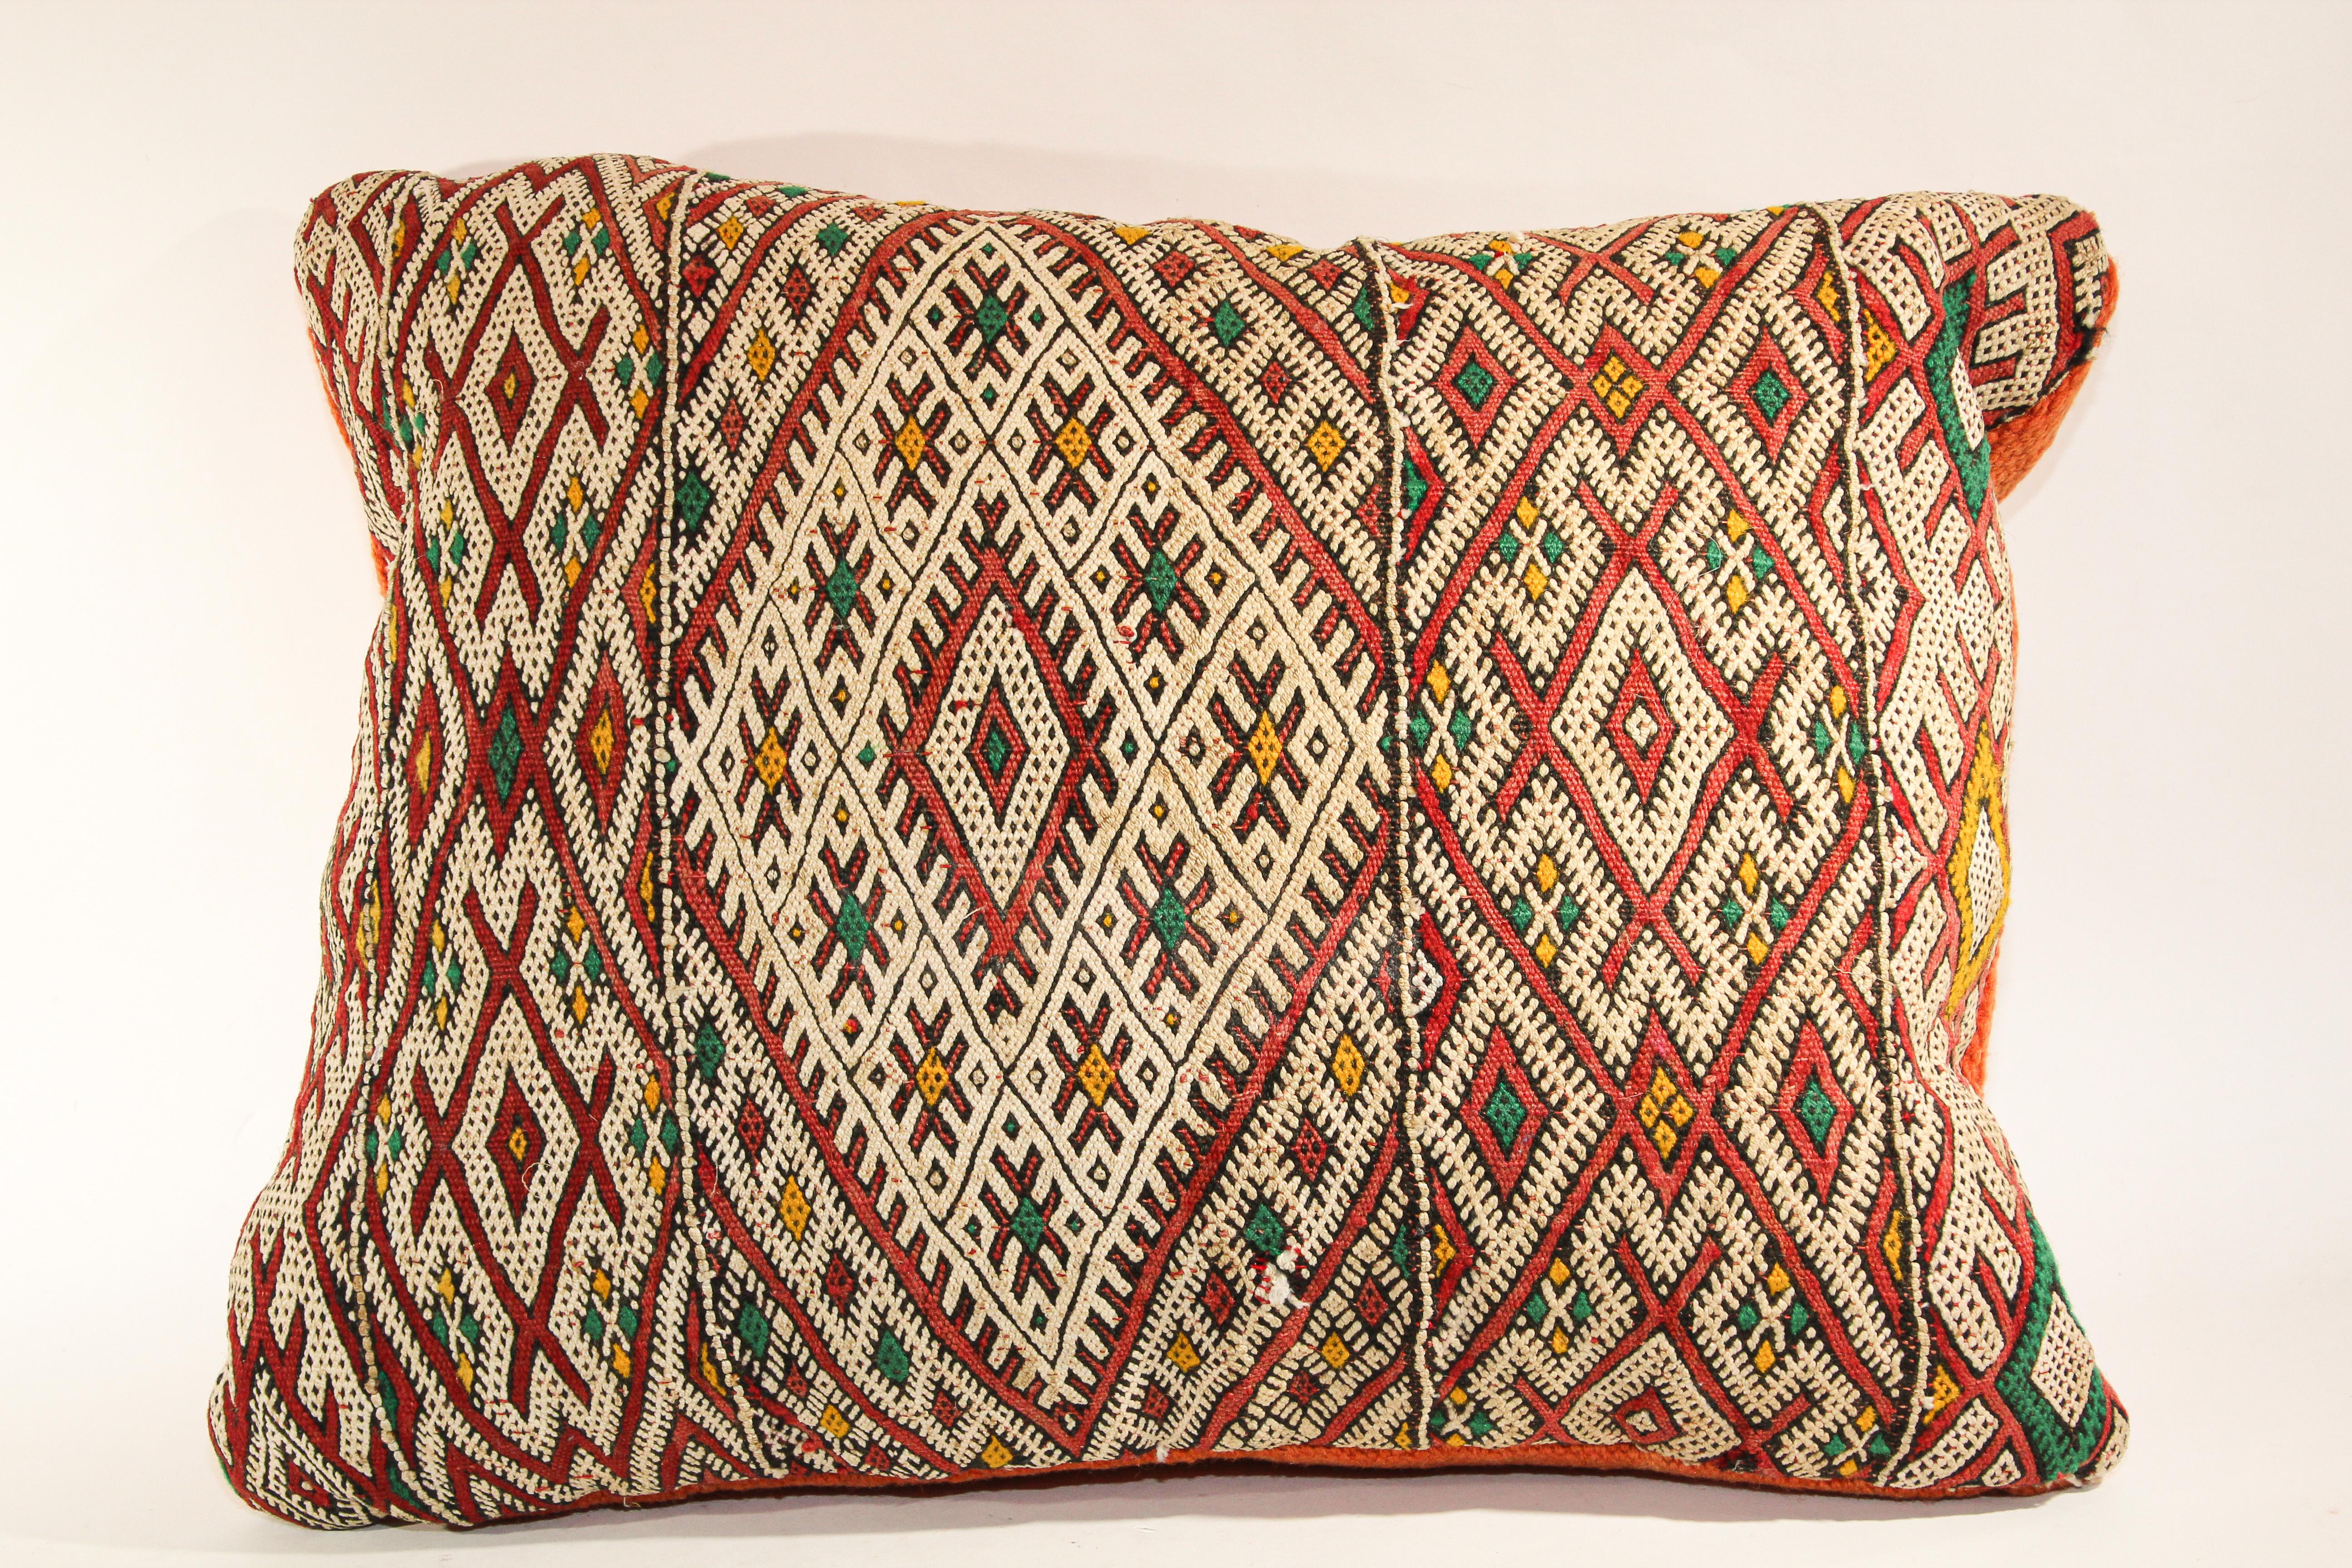 Moroccan ethnic handwoven tribal throw pillow made from a vintage rug.
The front of this Berber pillow and the back are made from a different rug, front is more elaborate and back is more plain.
Geometric North African tribal designs in red, white